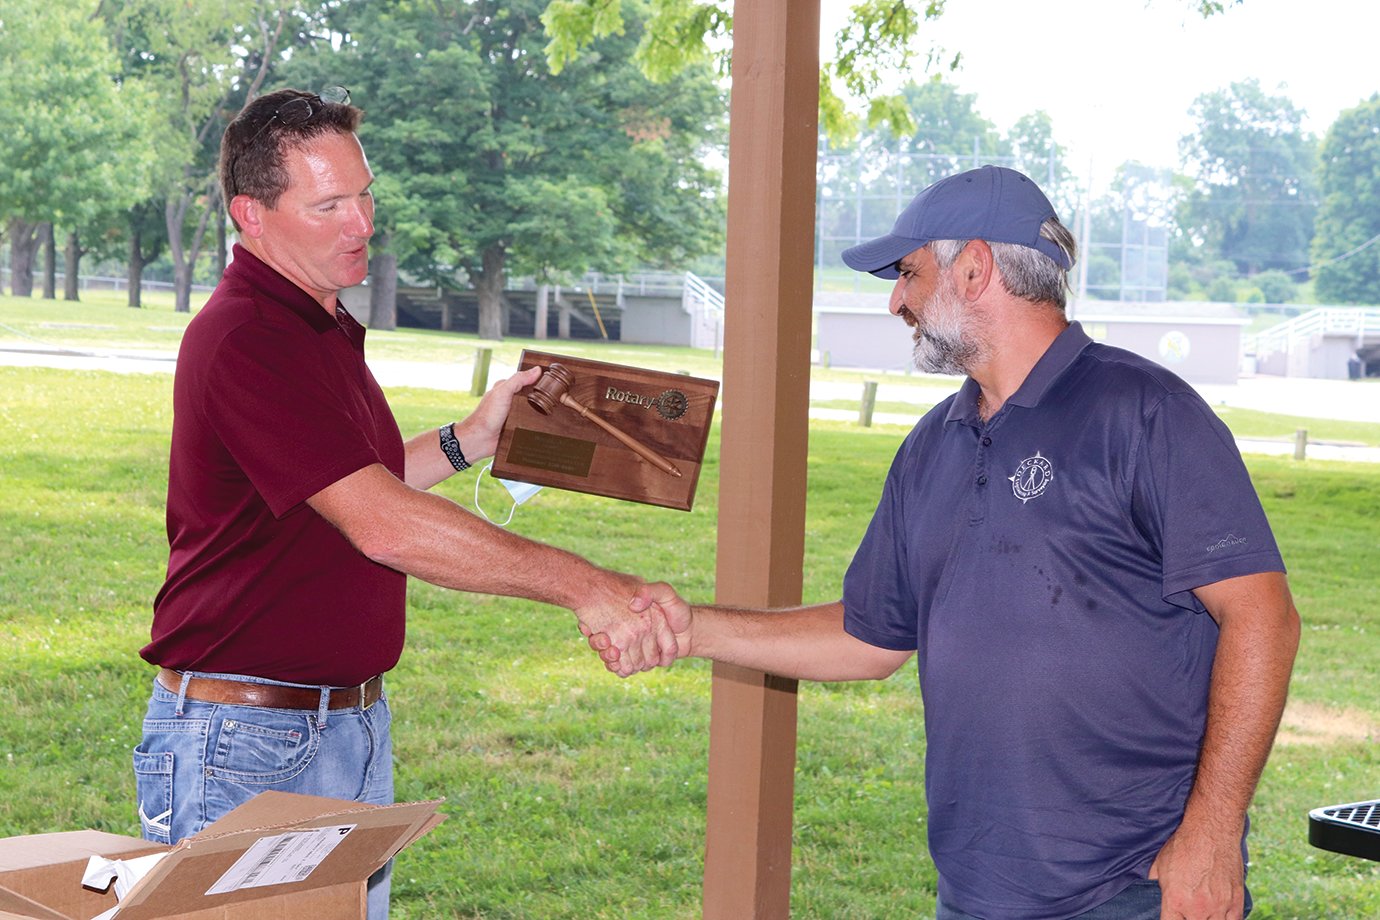 Former Rotary Club president Aaron Morgan, left, presents a plaque to outgoing president Roger Azar for his service at Milligan Park on Wednesday.